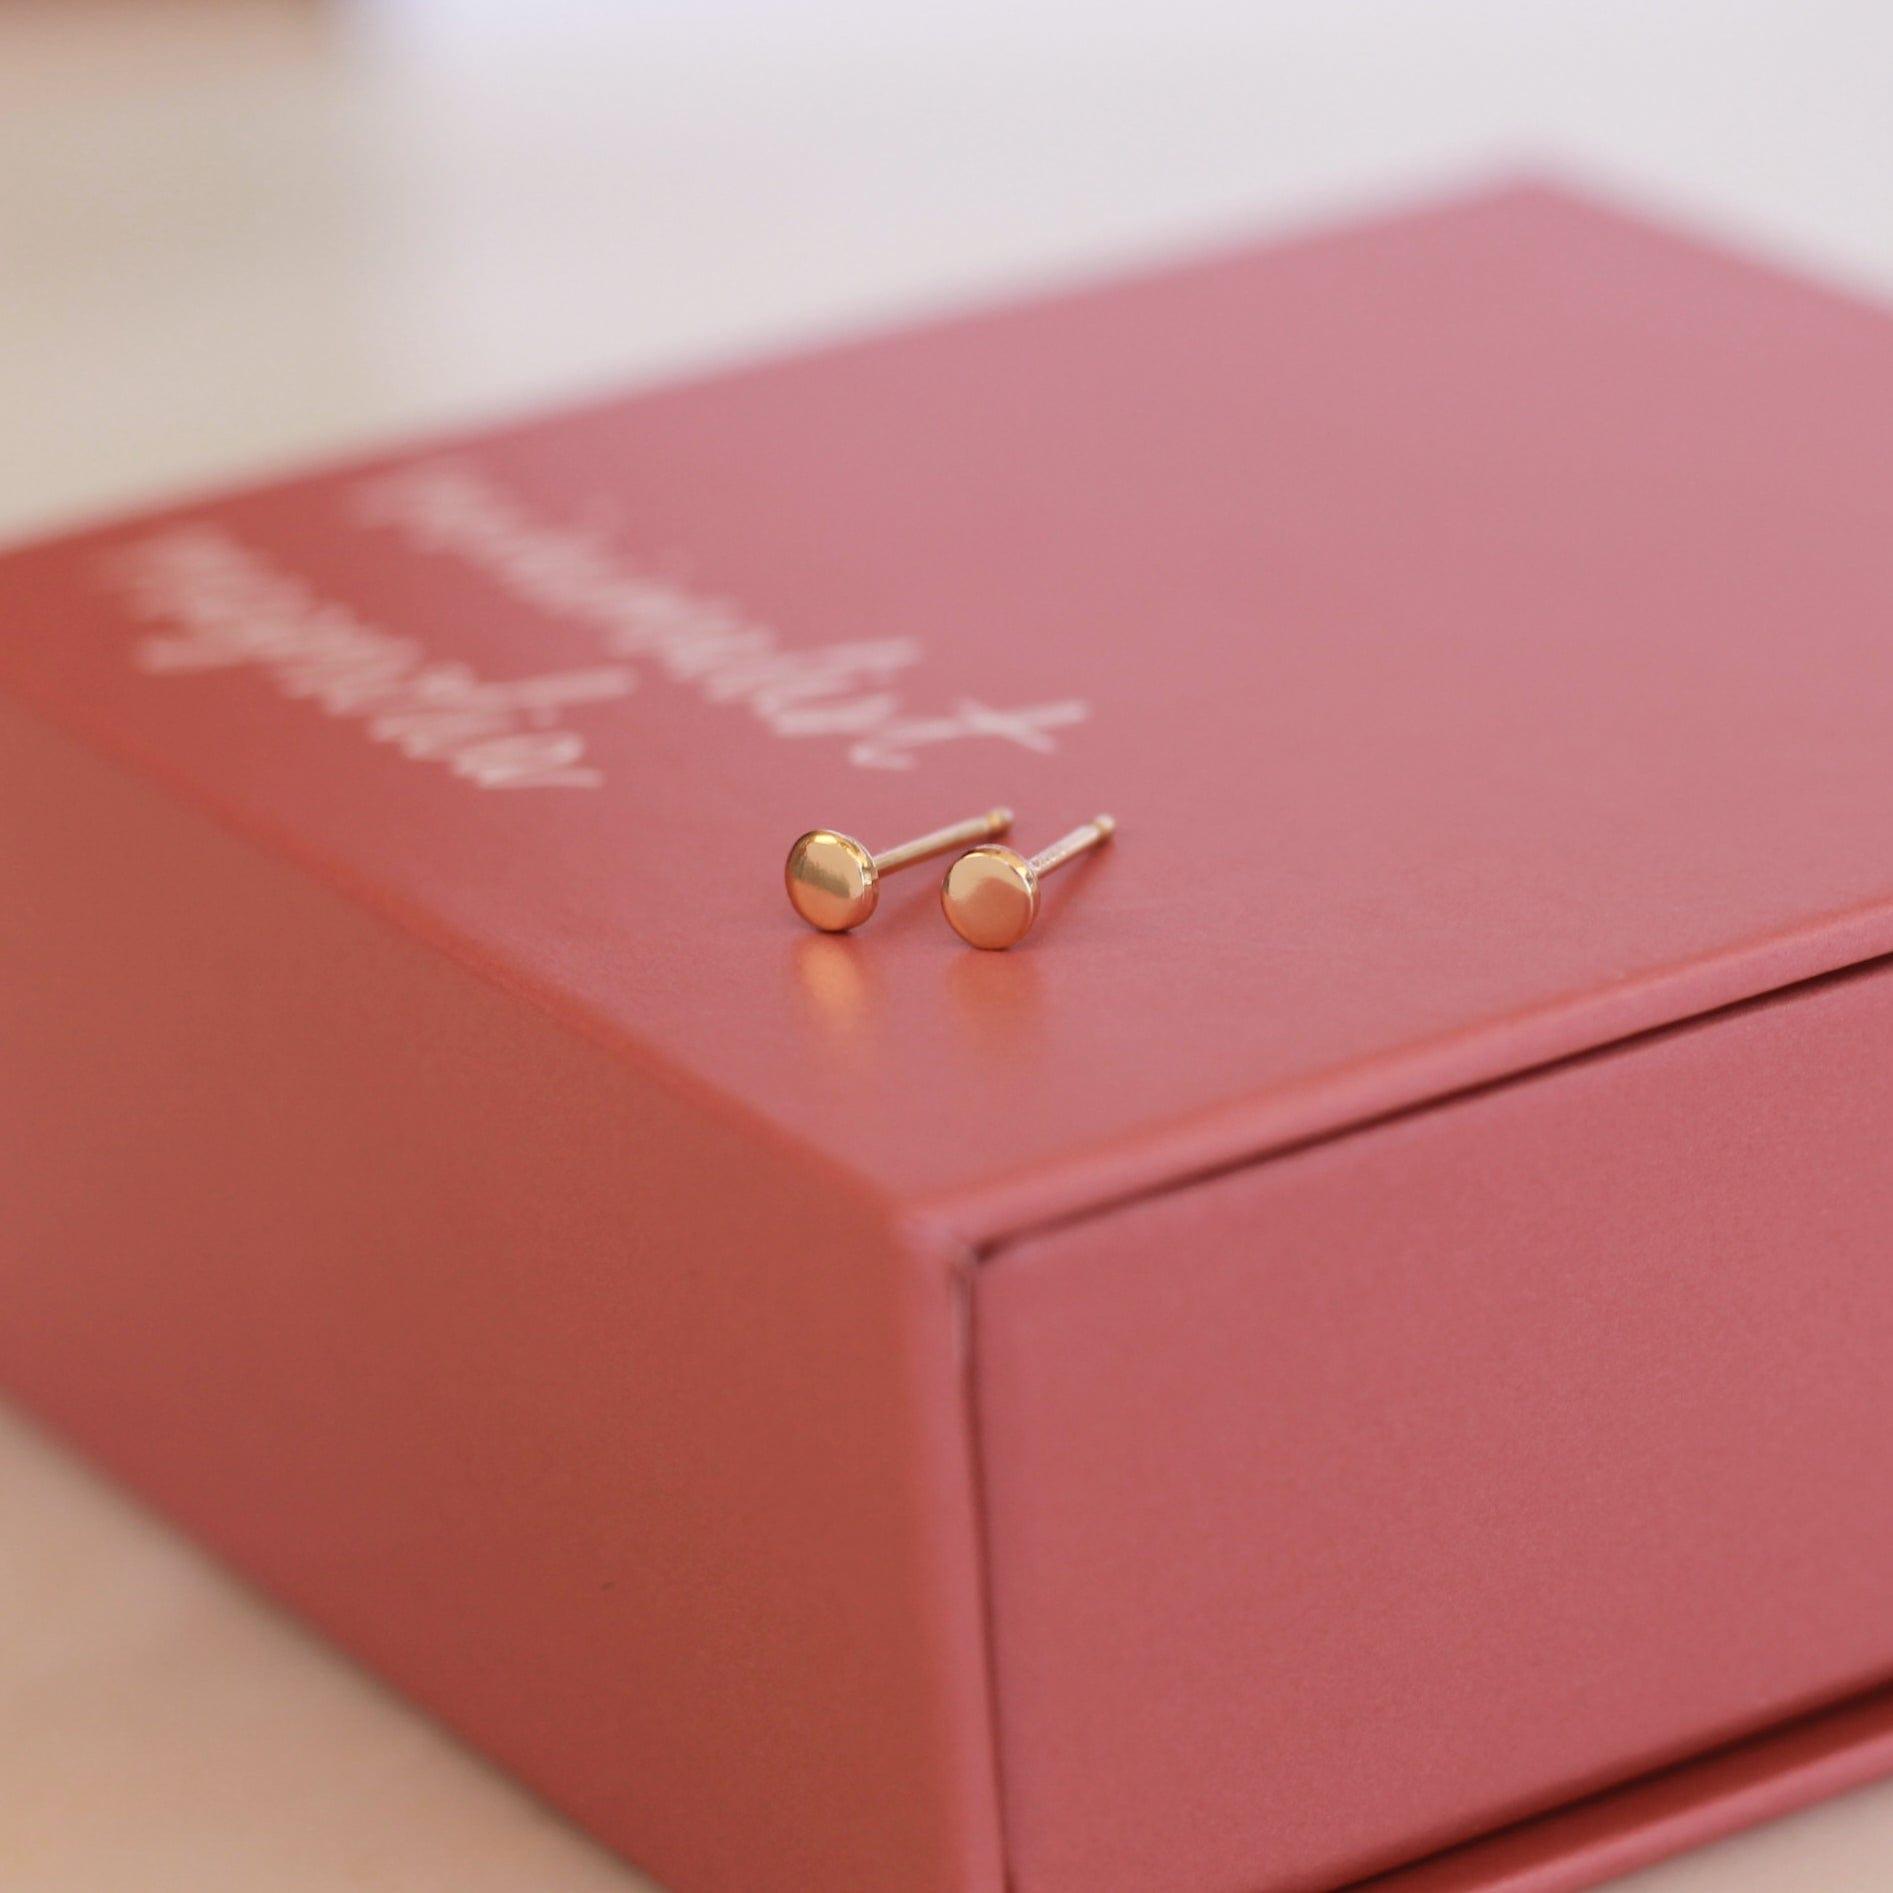 Tiny Dot Stud Earrings - Nolia Jewelry - Meaningful + Sustainably Handcrafted Jewelry